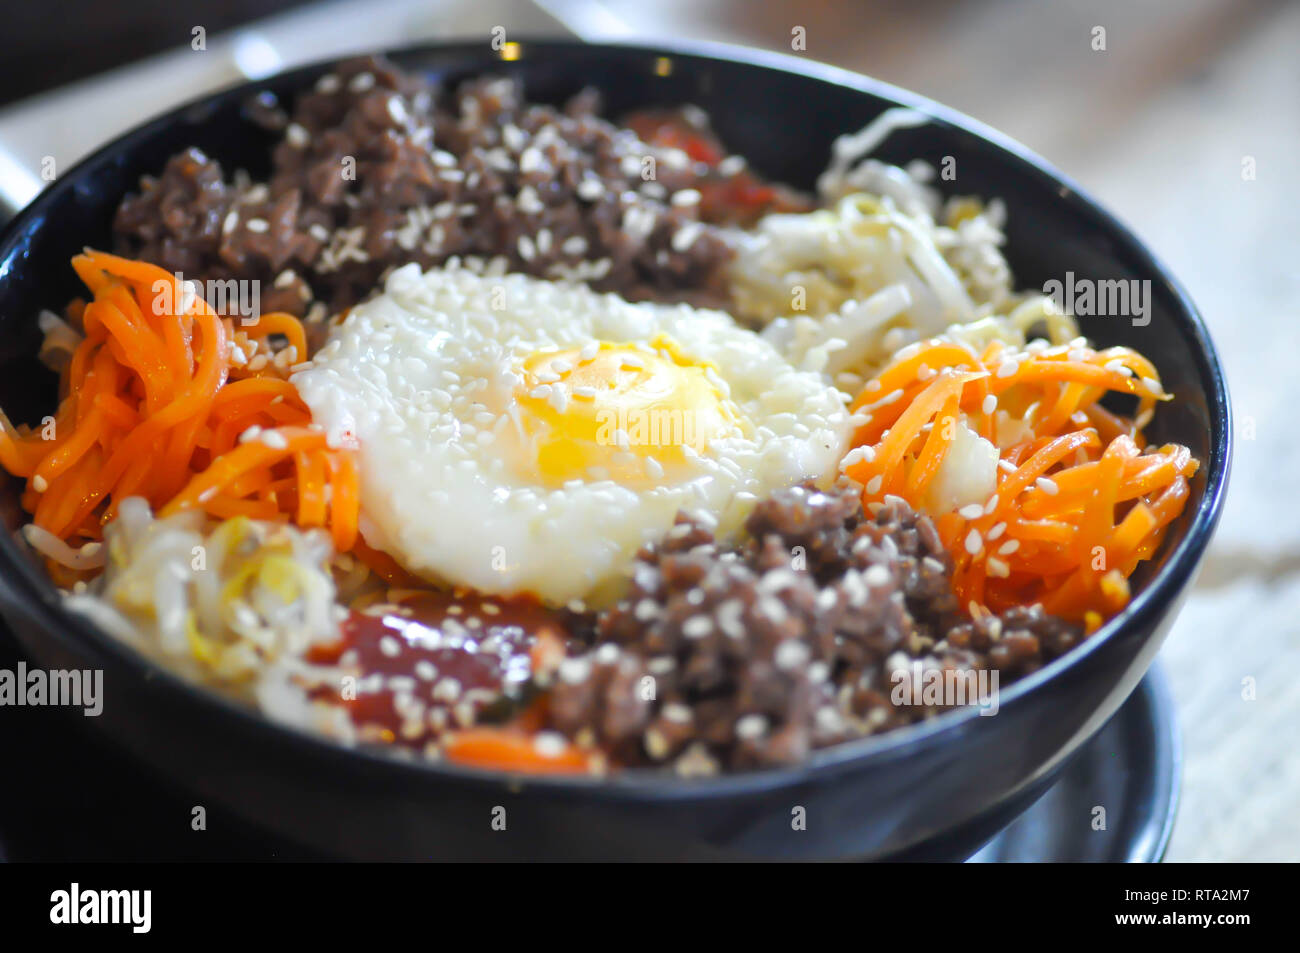 bibimbap or rice with egg and vegetable, Korean food Stock Photo